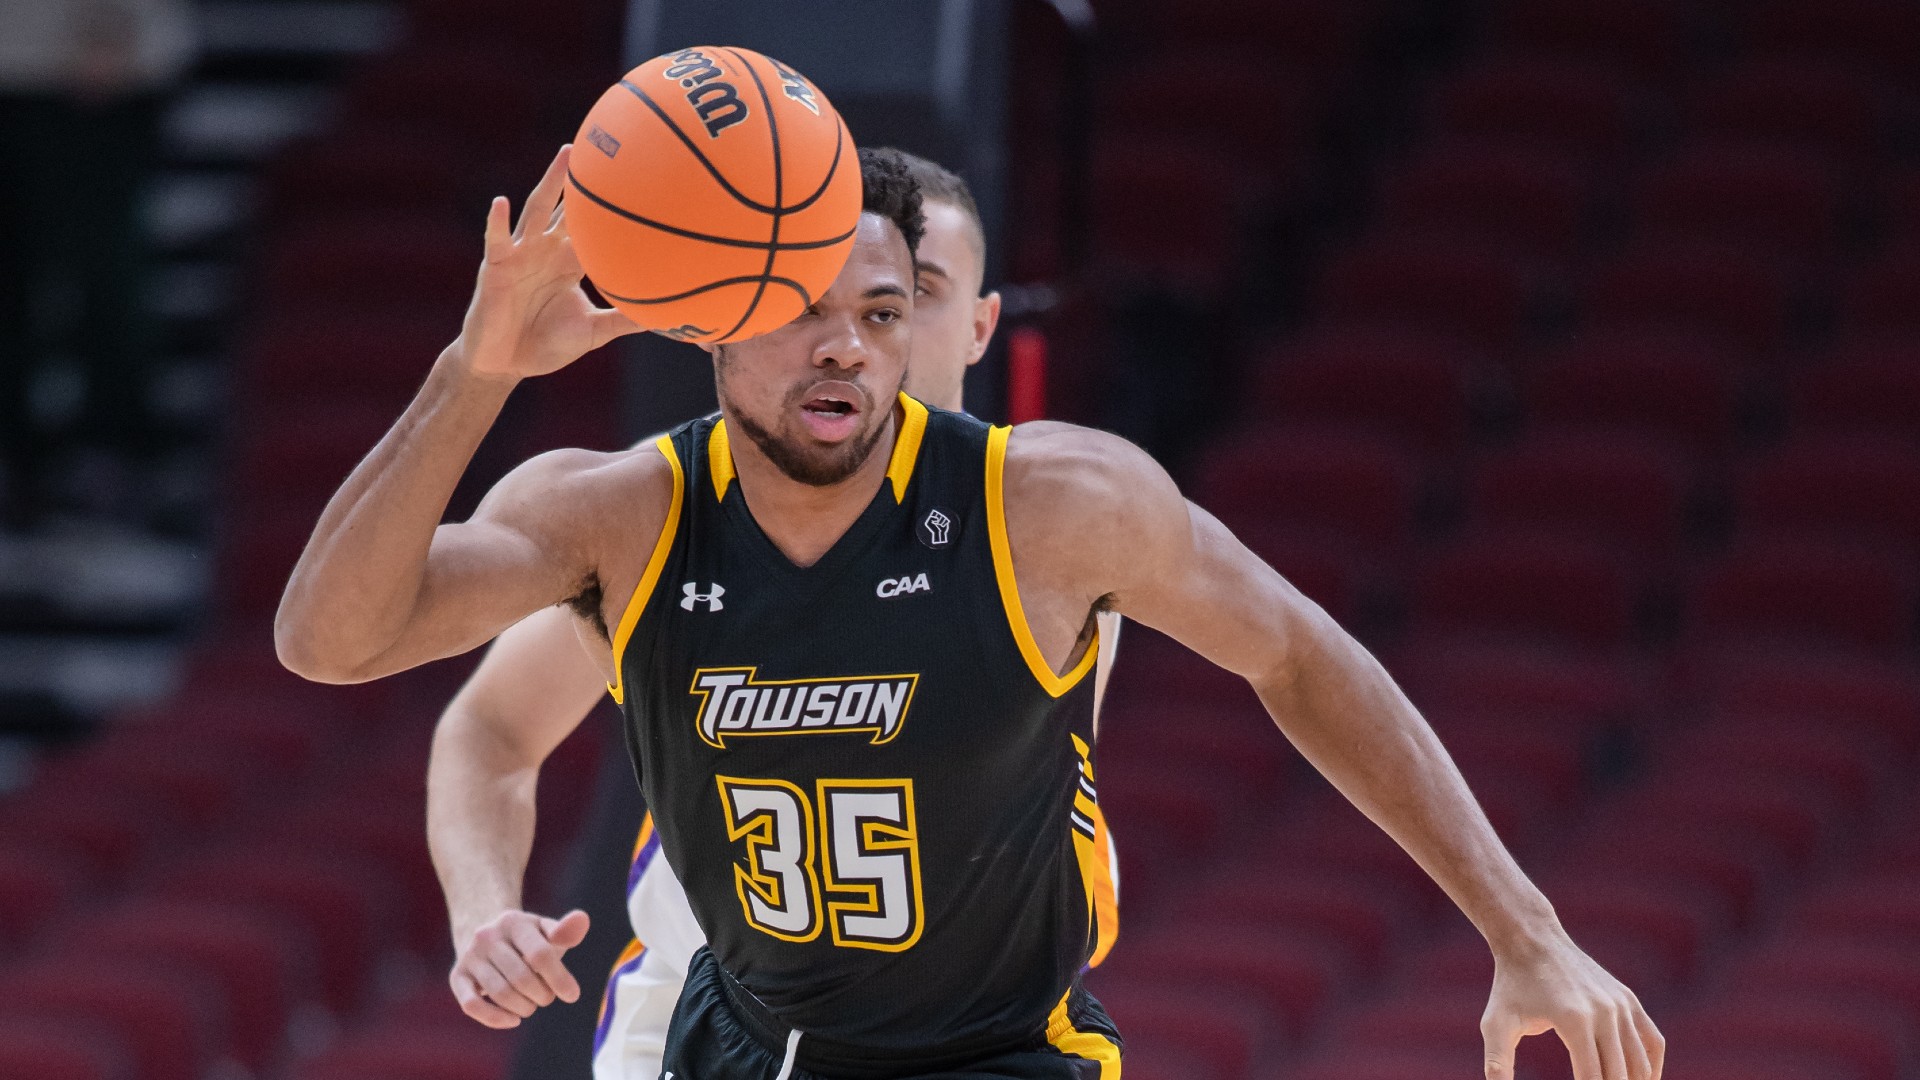 NCAAB Conference Tournament Odds, Best Bets: Our Top Picks for Sunday's Slate, Featuring Delaware vs. Towson (March 5)